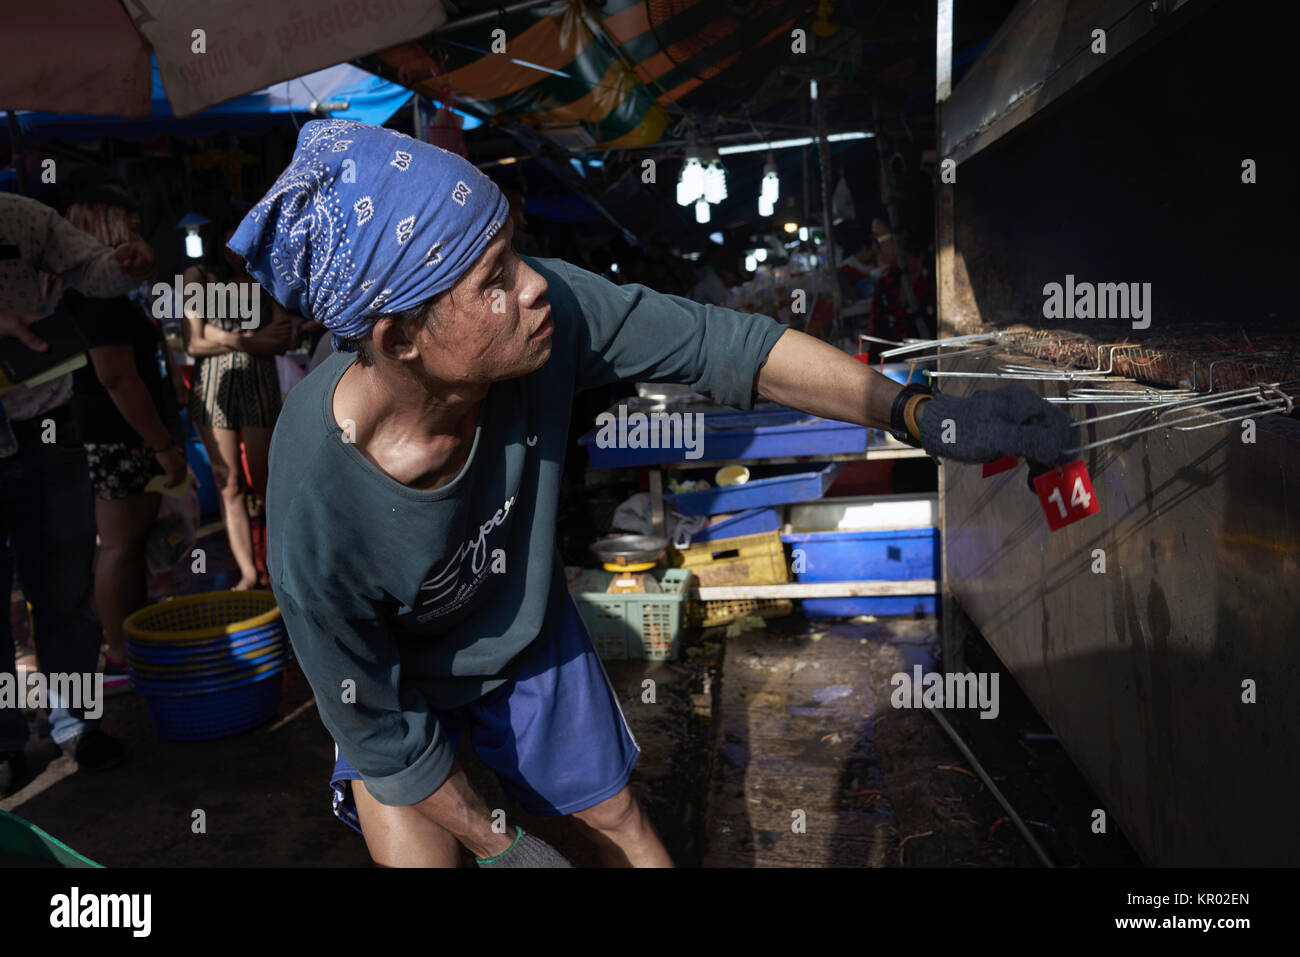 Man cooking. Close up of a BBQ chef cooking on an open range in a Thailand street market. Stock Photo